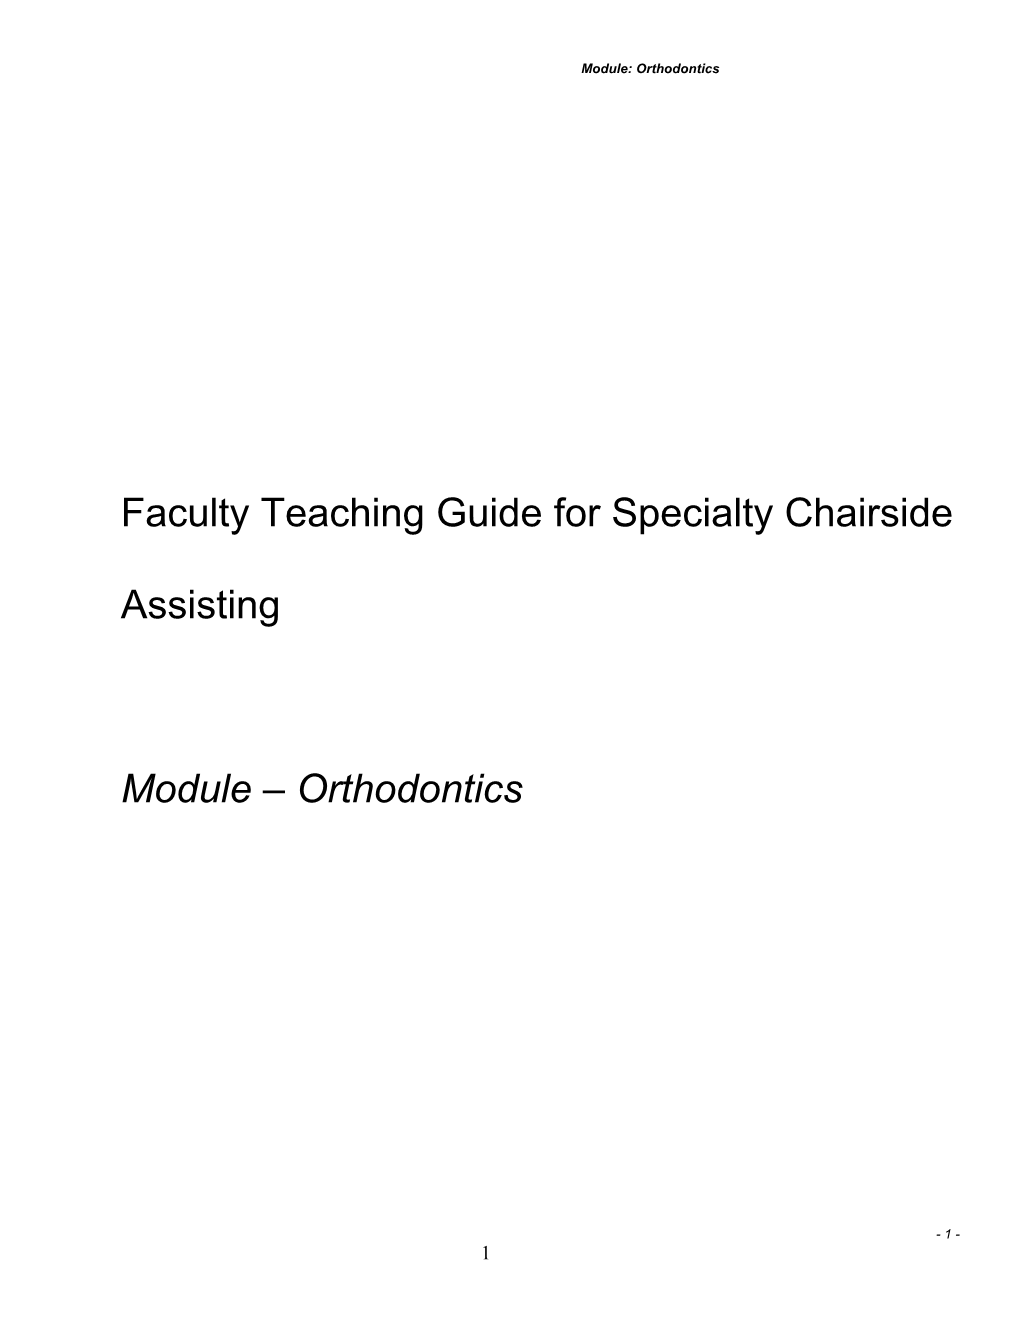 Faculty Teaching Guide for Specialty Chairside Assisting s1